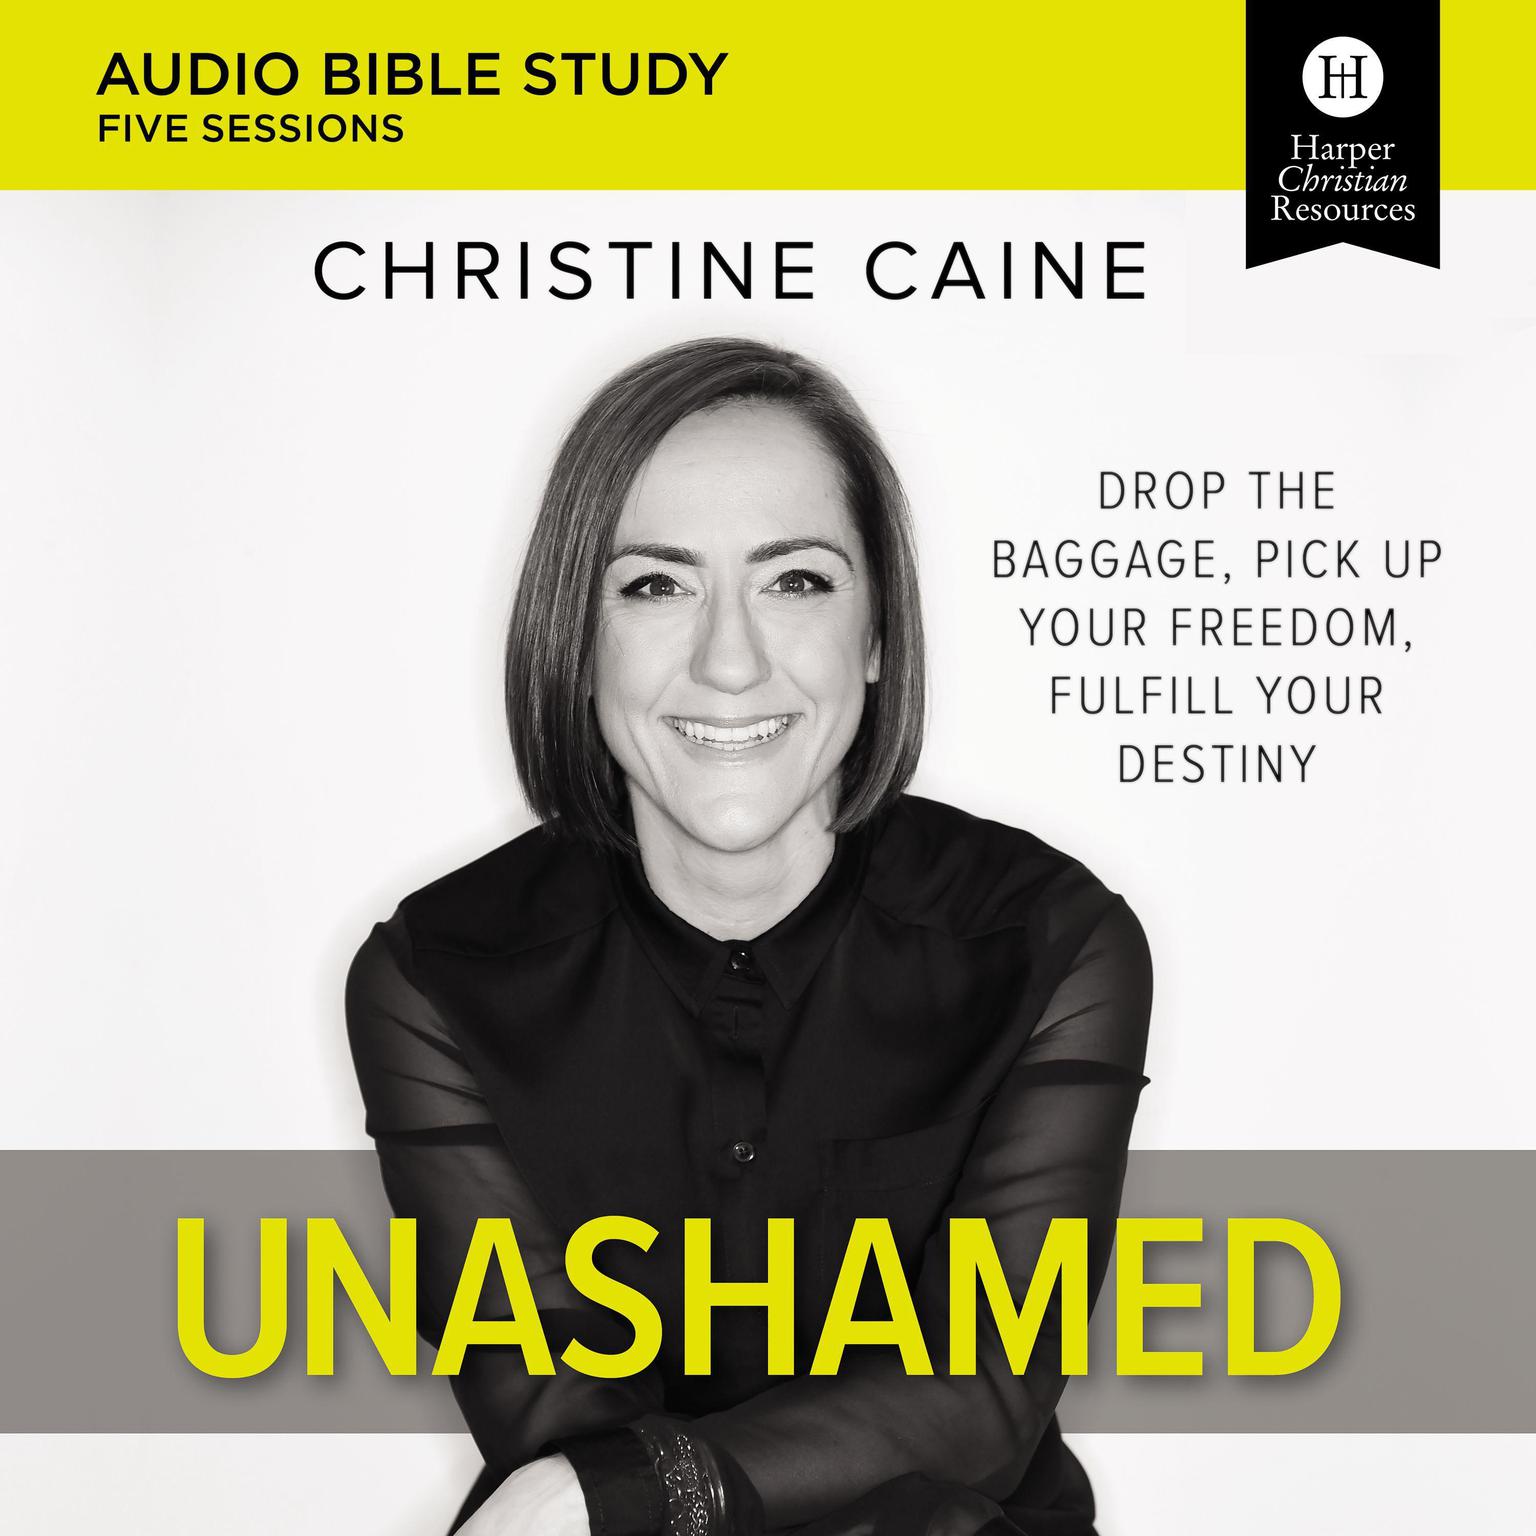 Unashamed: Audio Bible Studies: Drop the Baggage, Pick up Your Freedom, Fulfill Your Destiny Audiobook, by Christine Caine